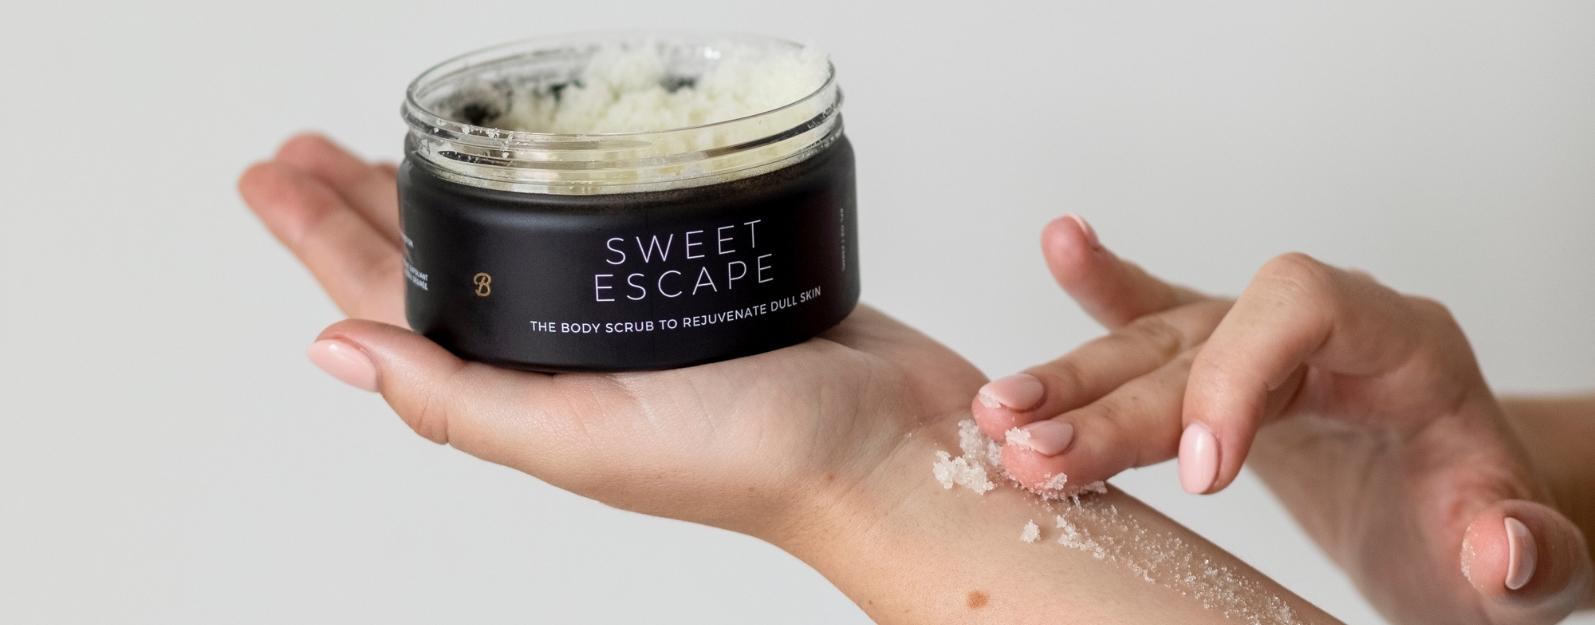 Ultra-thin Exfoliating Sugar Scrubs to target and treat skin challenges